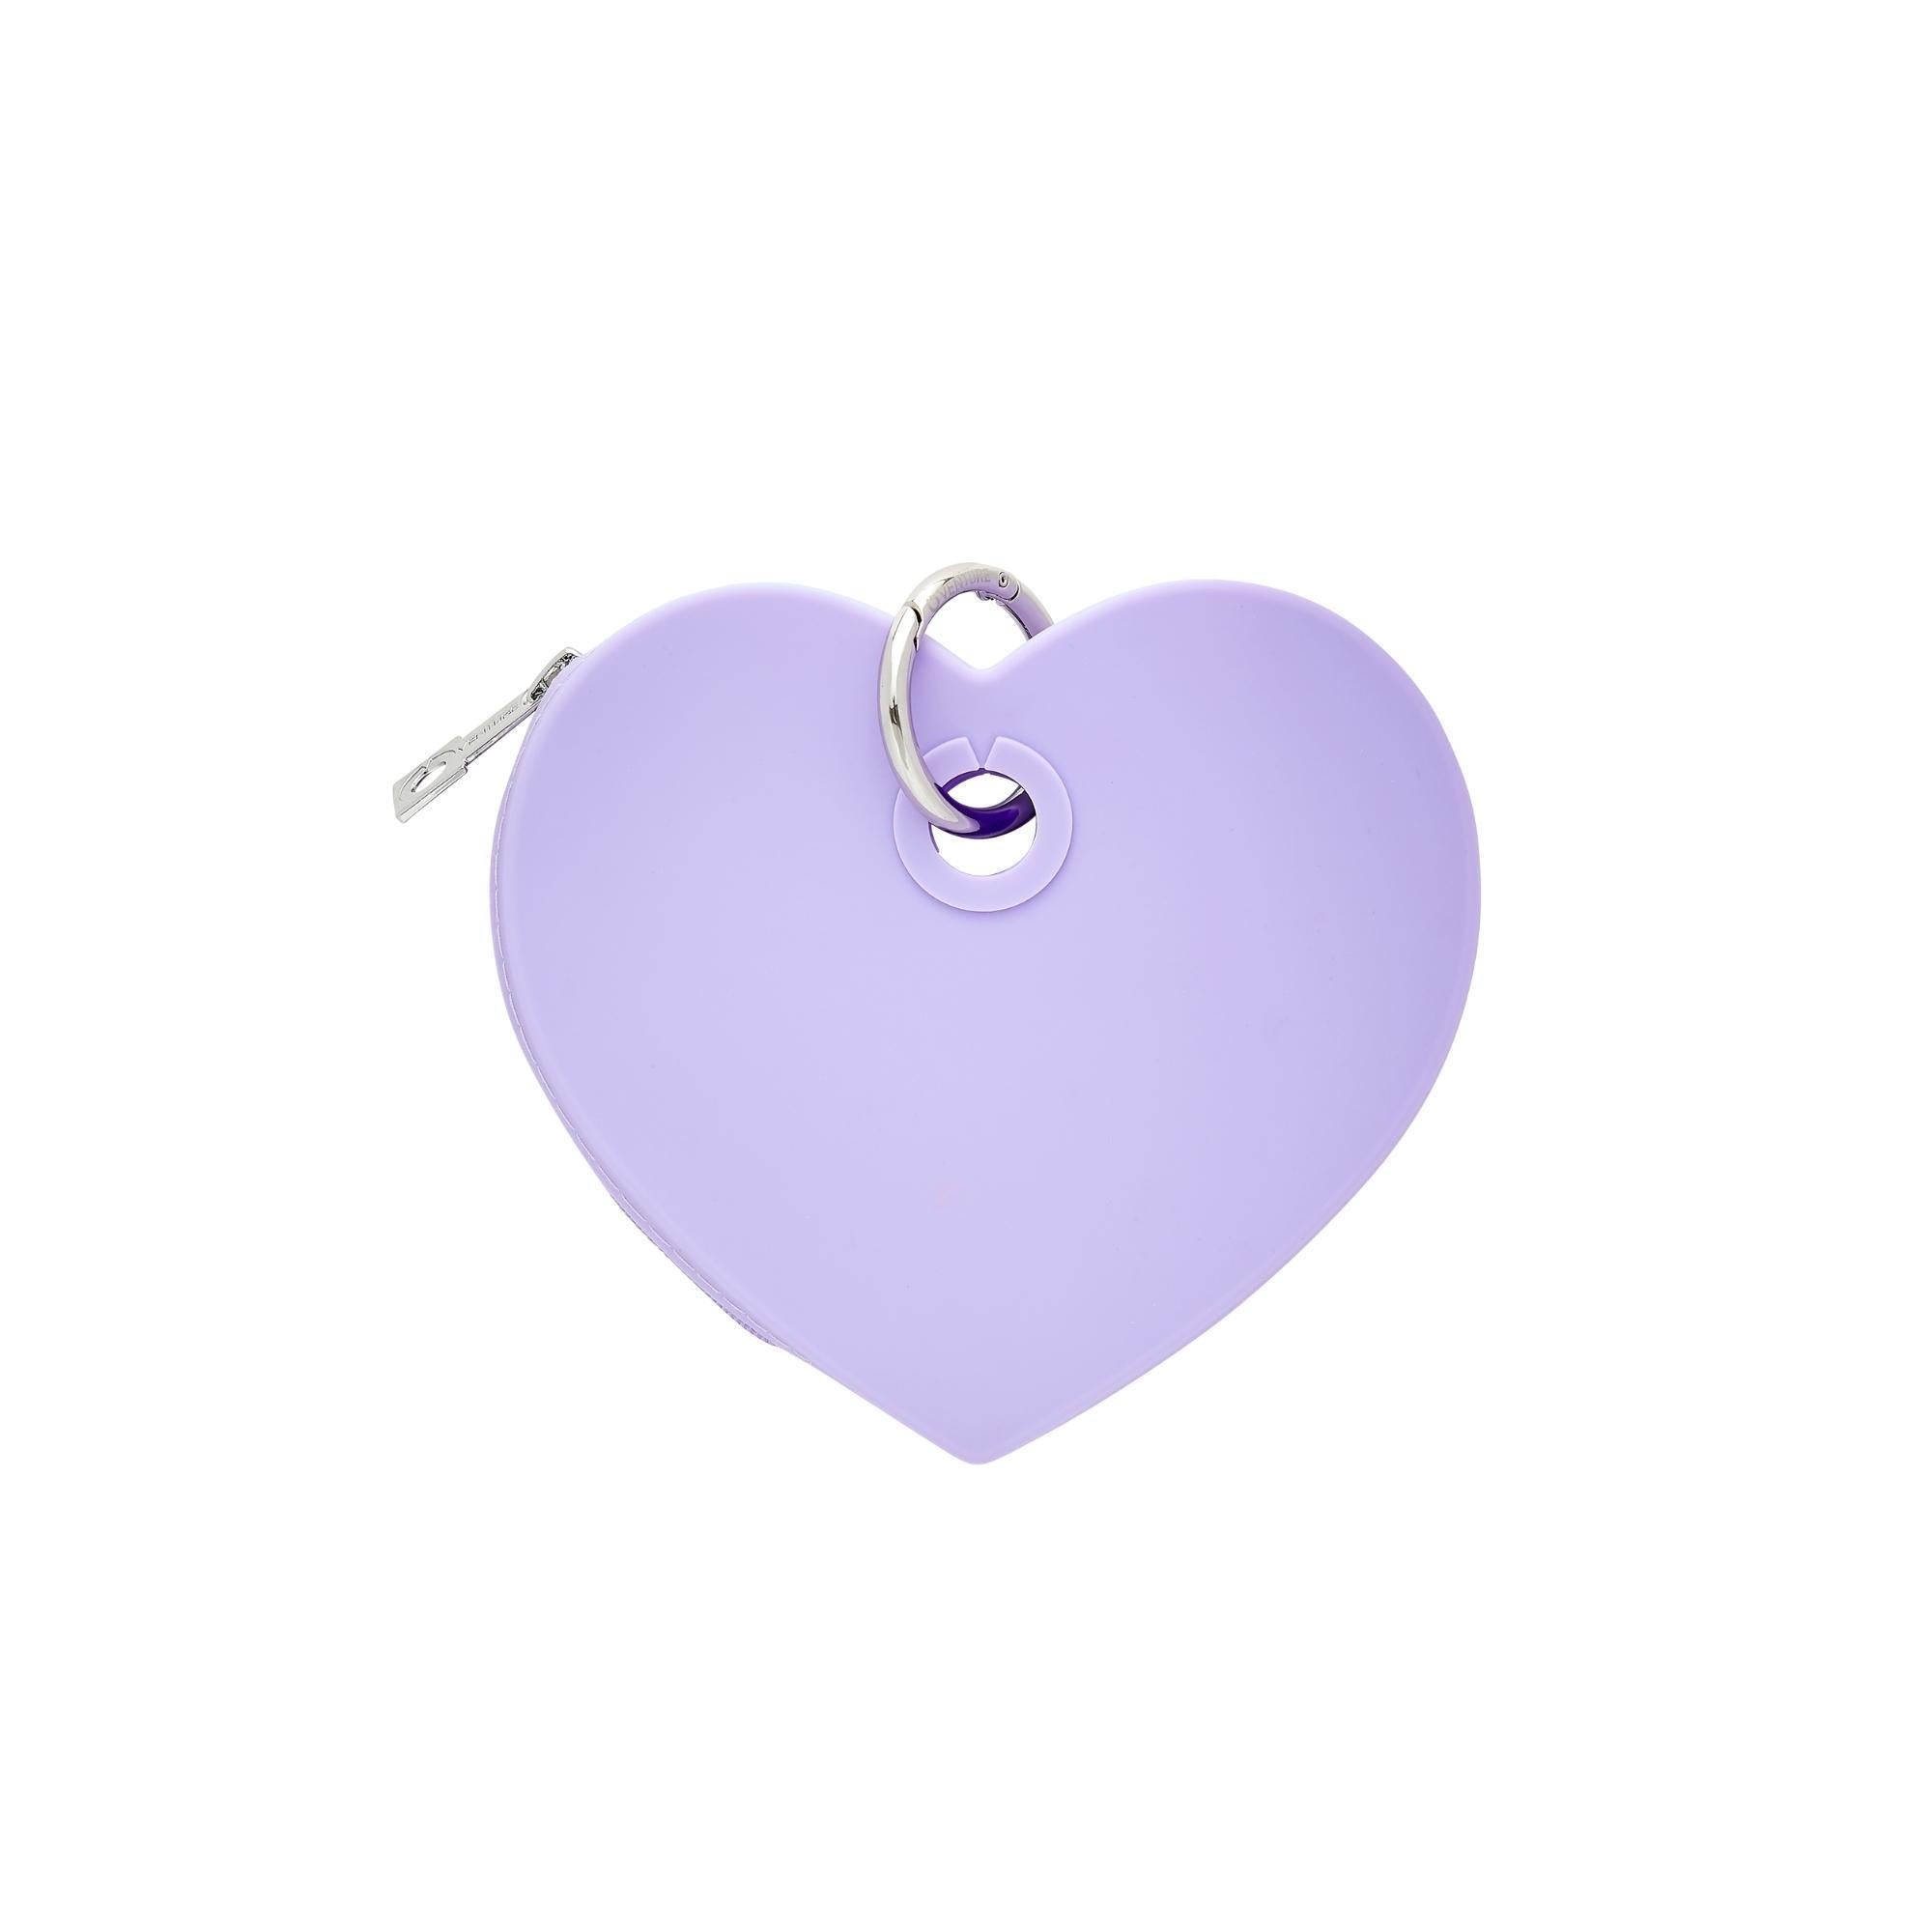 Oventure Silicone Heart Pouch - in The Cabana